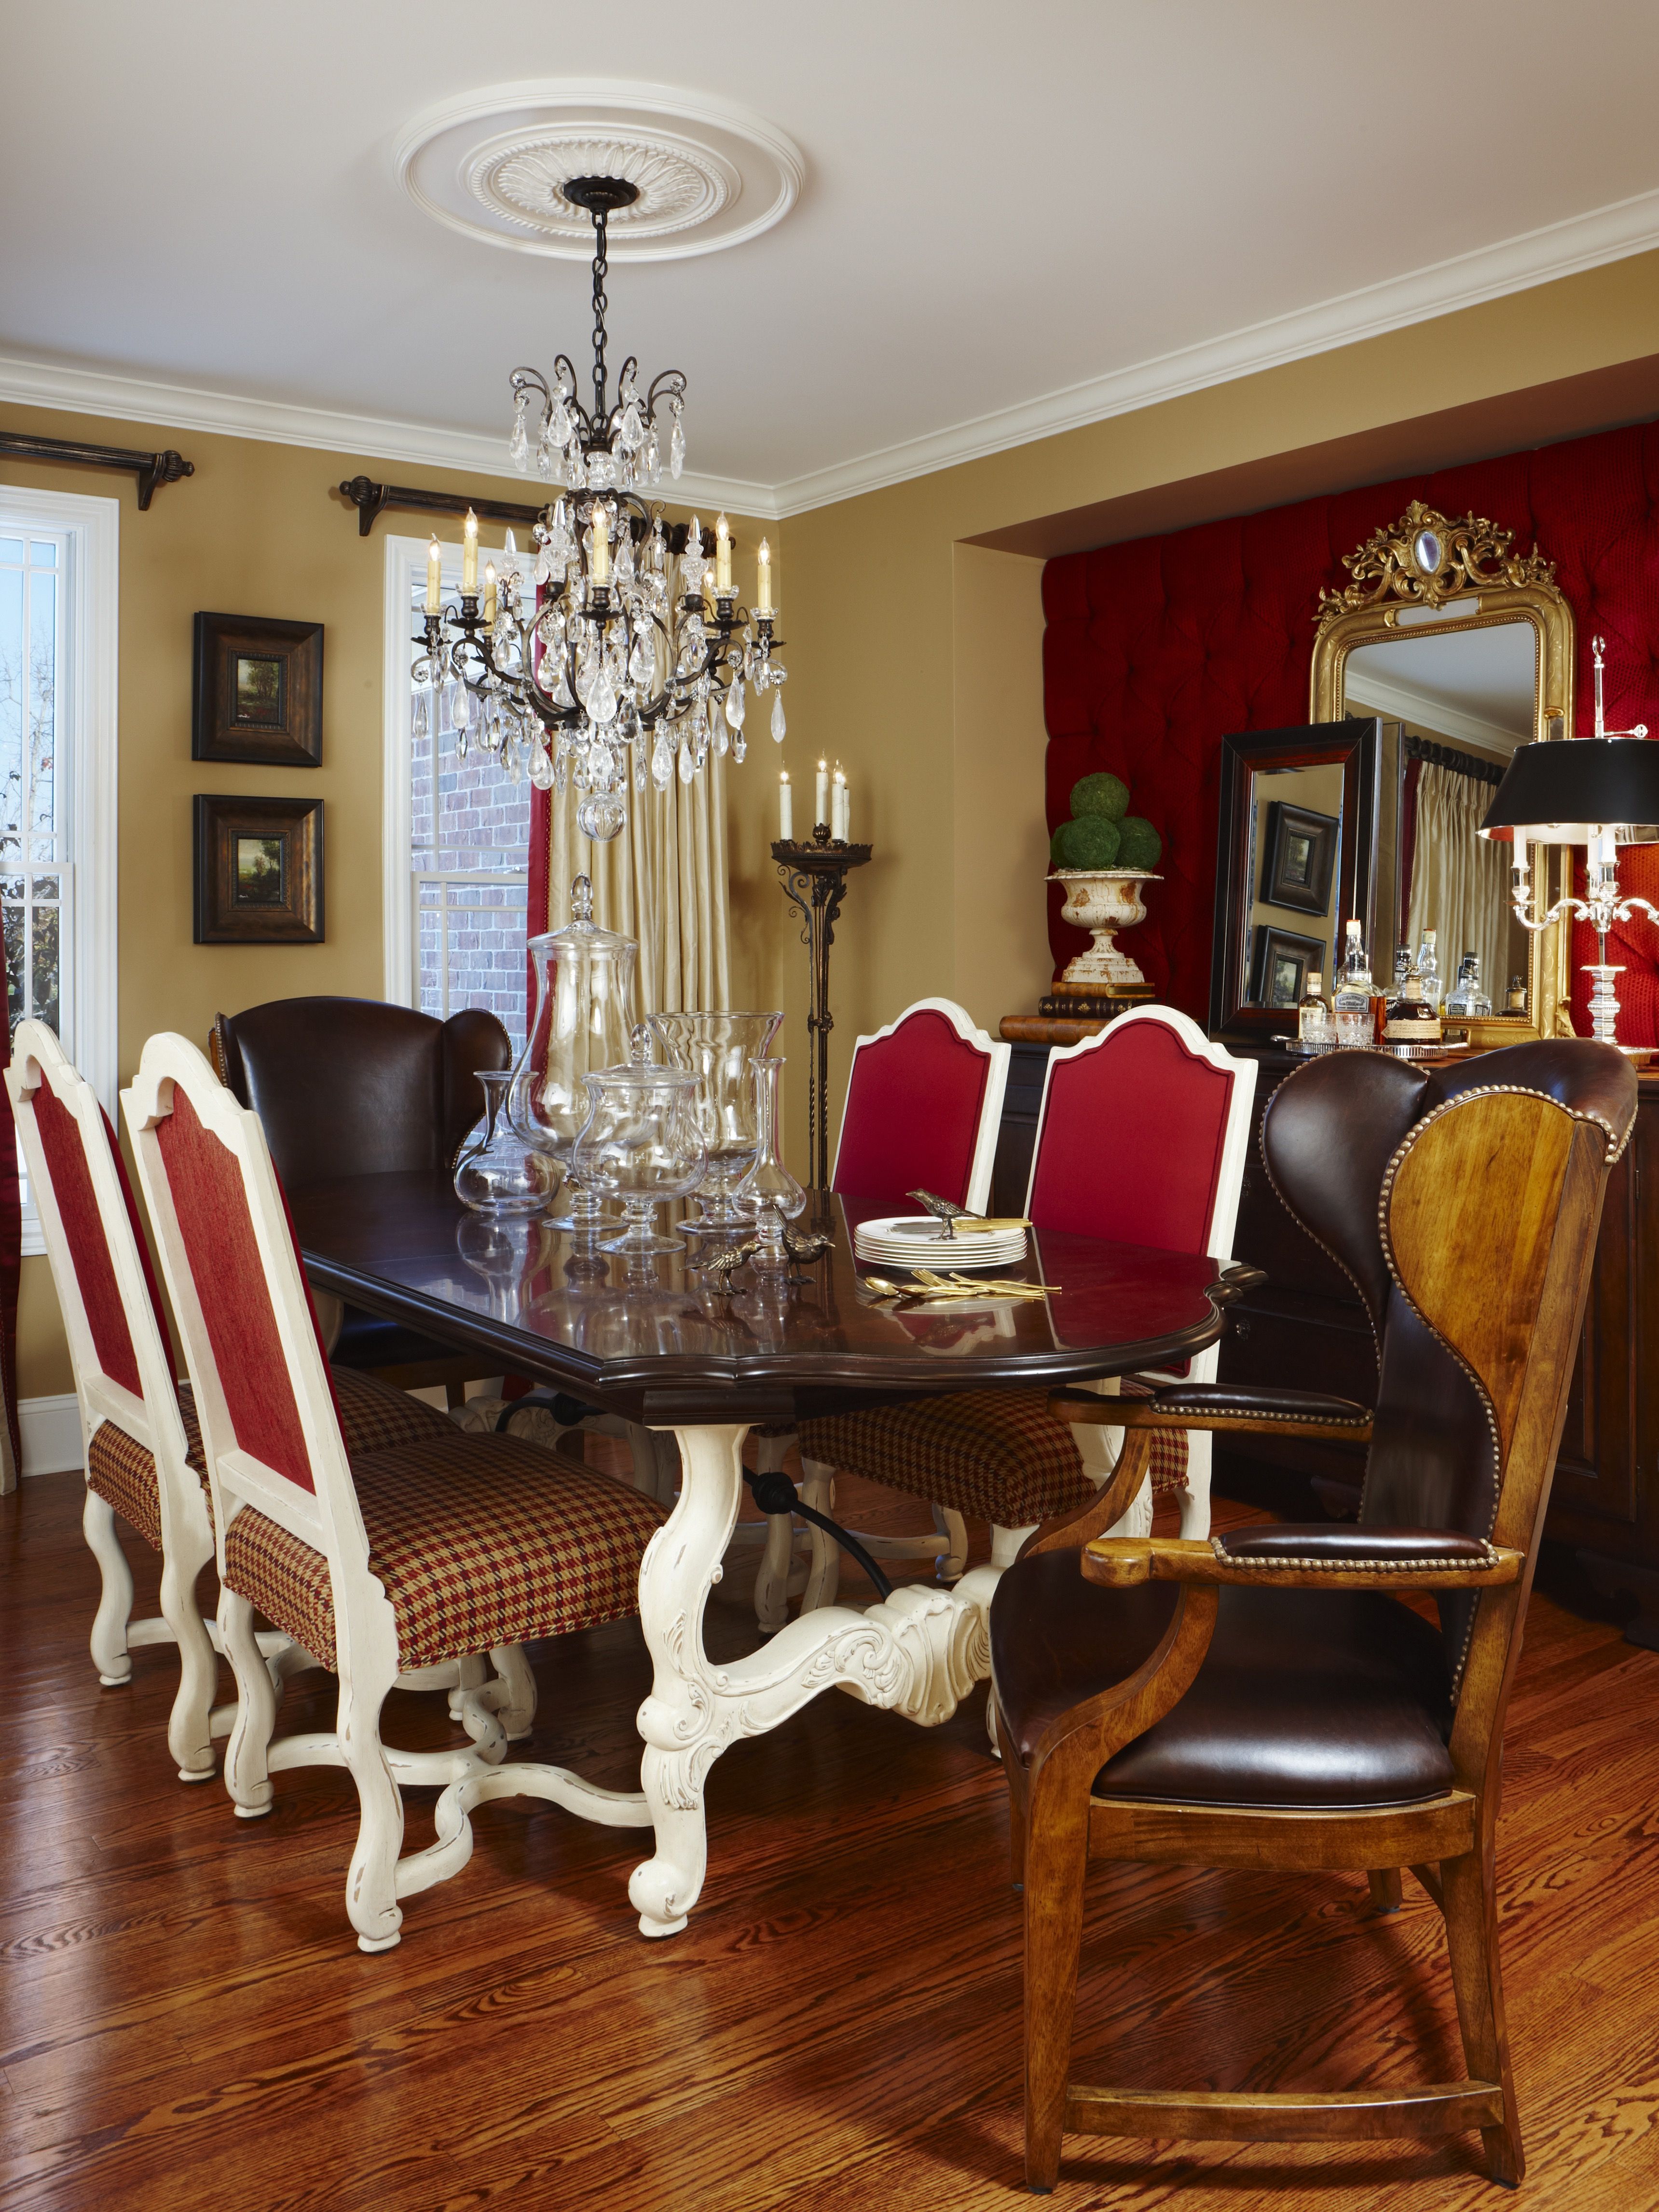 Classic Dining Room With Ethnical French Influences (View 15 of 15)